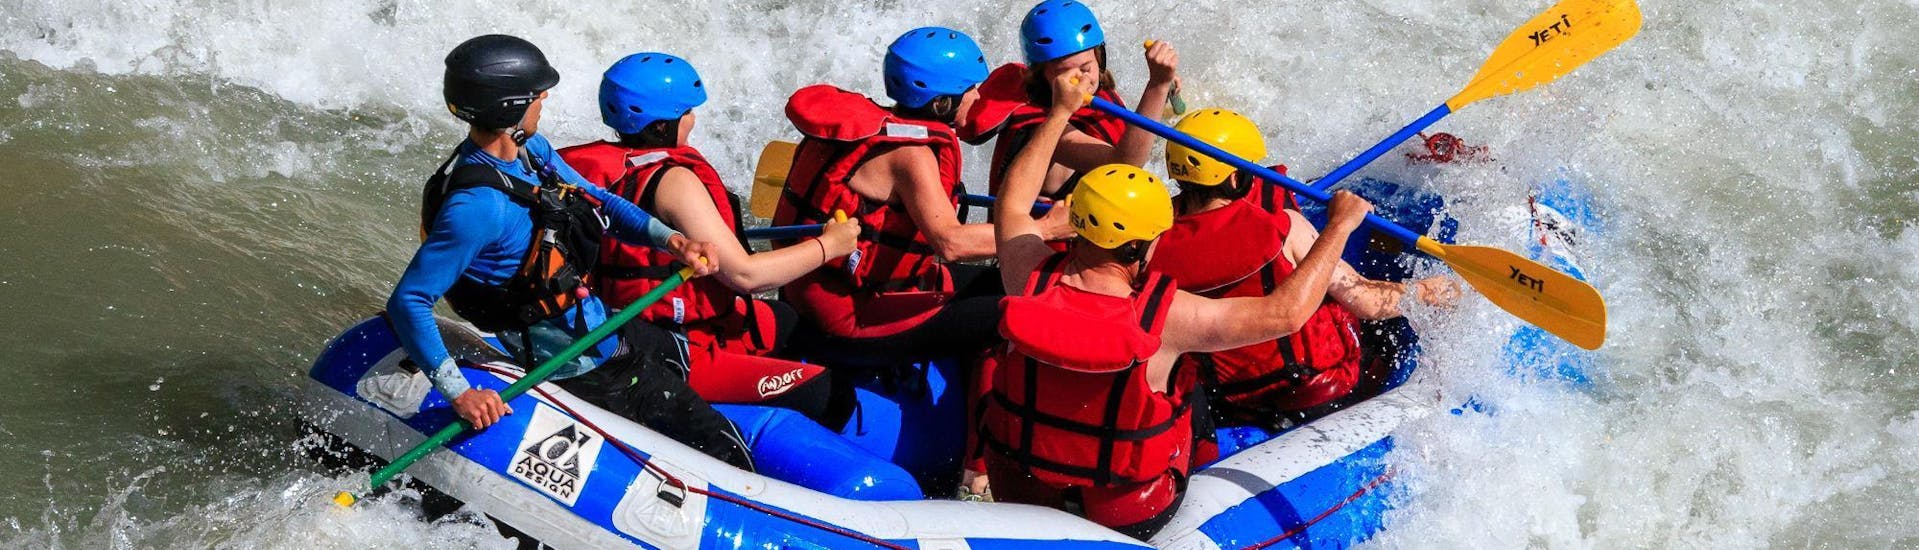 A group is caught in rapids and is having fun during the rafting descent of the Verdon's Grand Canyon organized by Yeti Rafting.